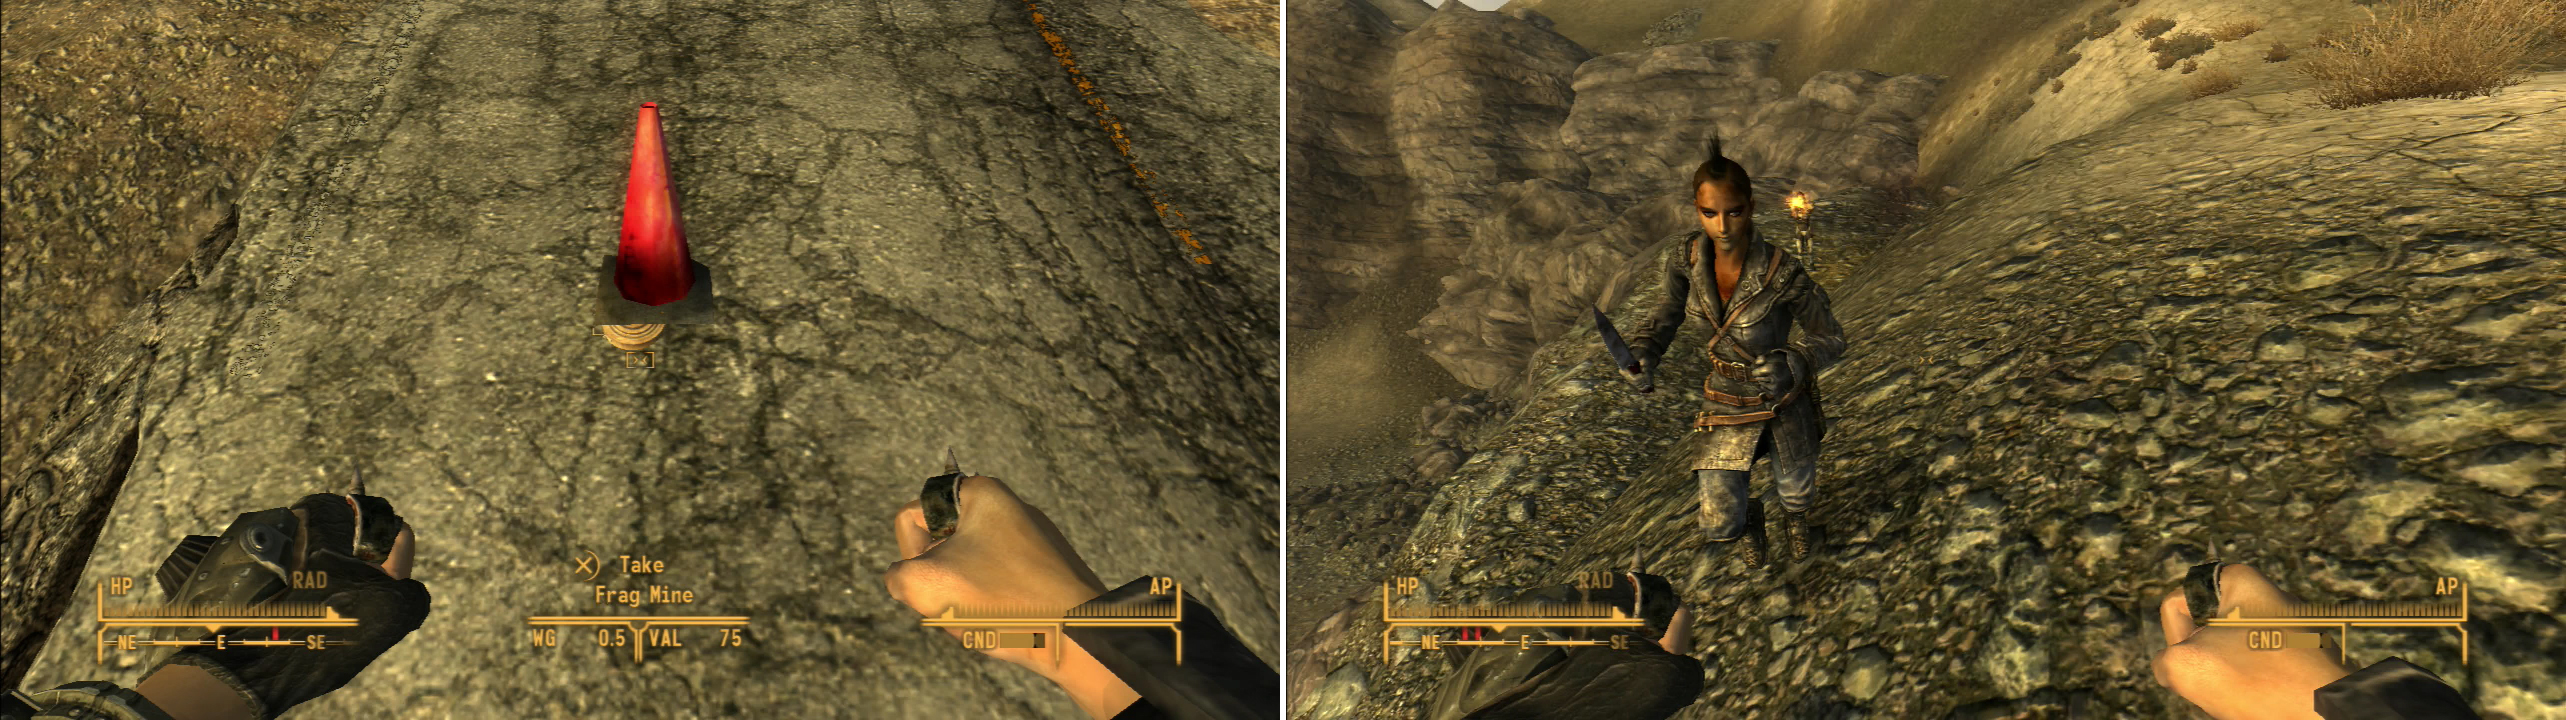 Be wary of traps hidden on the road (left). If you take to the hills, you can ambush the Viper Gangers who would otherwise have tried to ambush you (right).